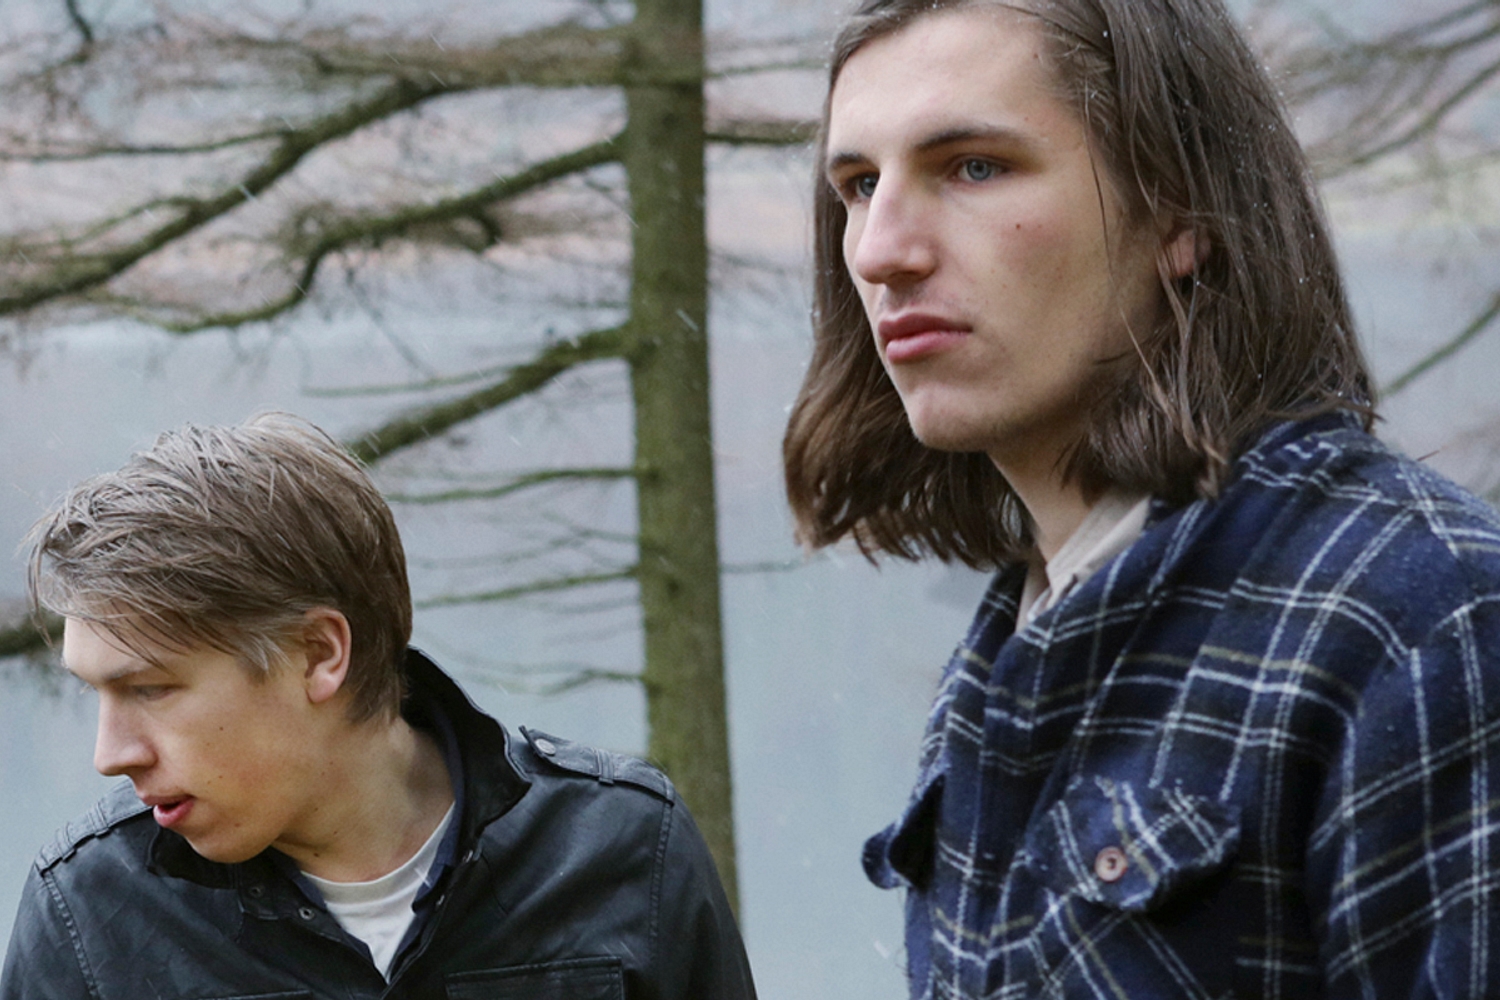 Drenge cover Taylor Swift’s ‘Bad Blood’ in BBC R1 Live Lounge